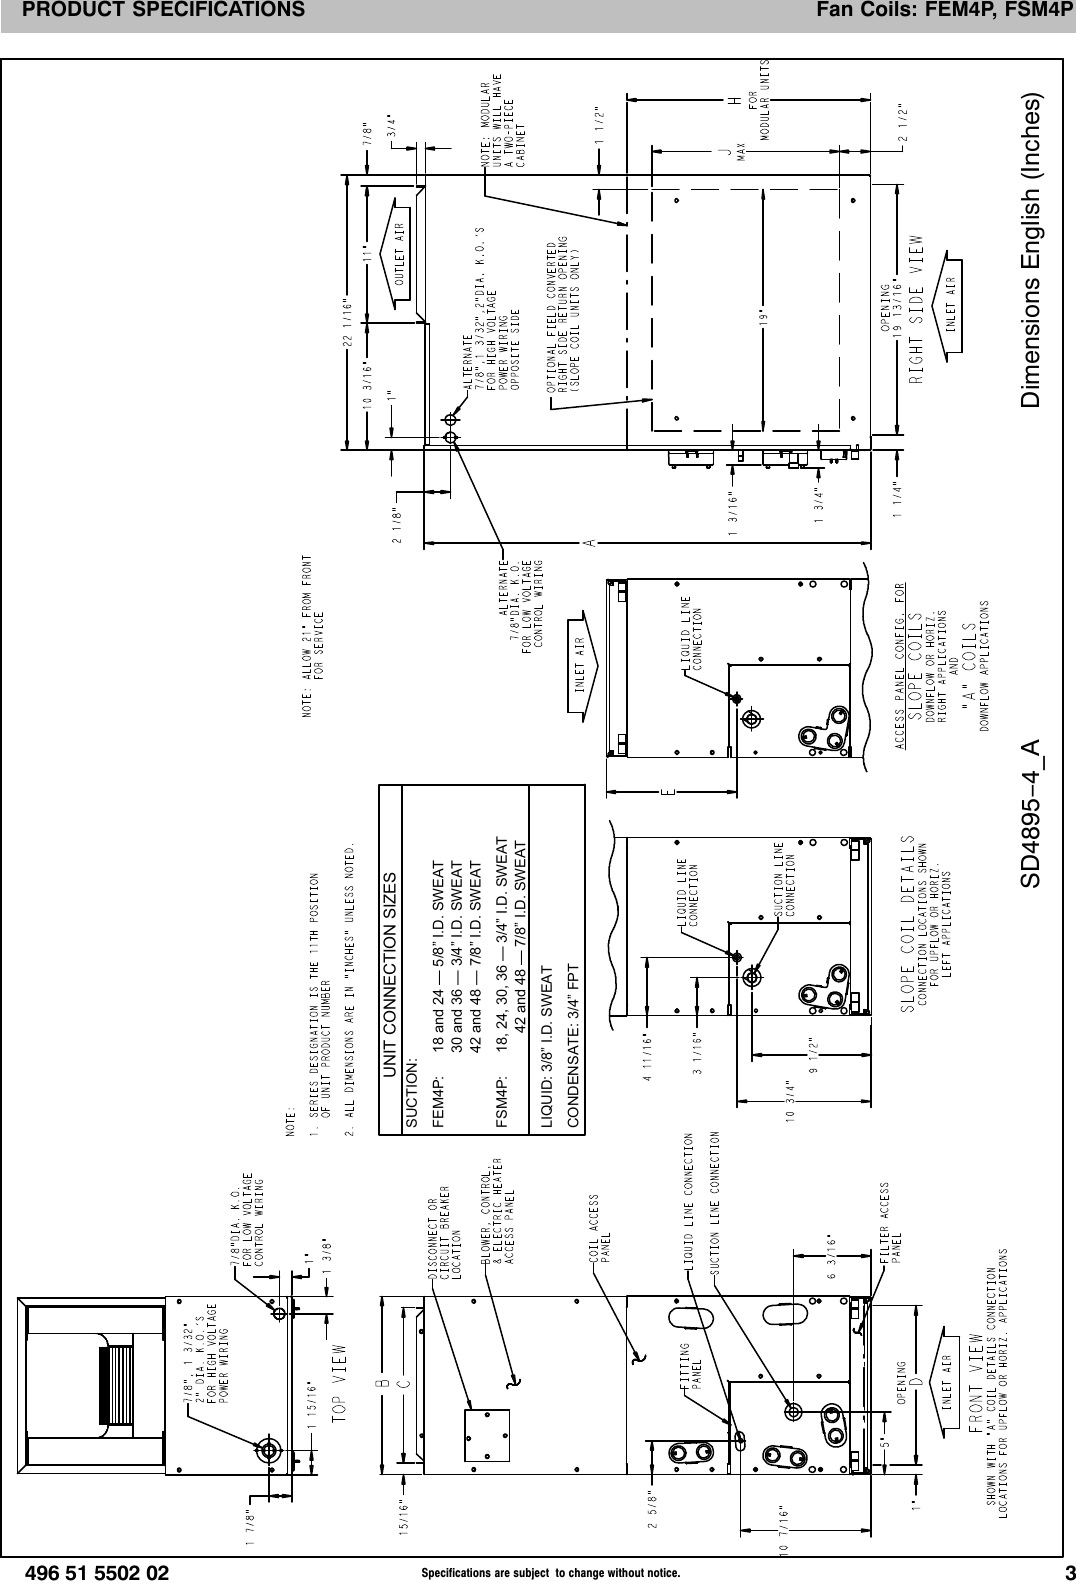 Page 3 of 12 - 49651550202  Airquest FEM4P